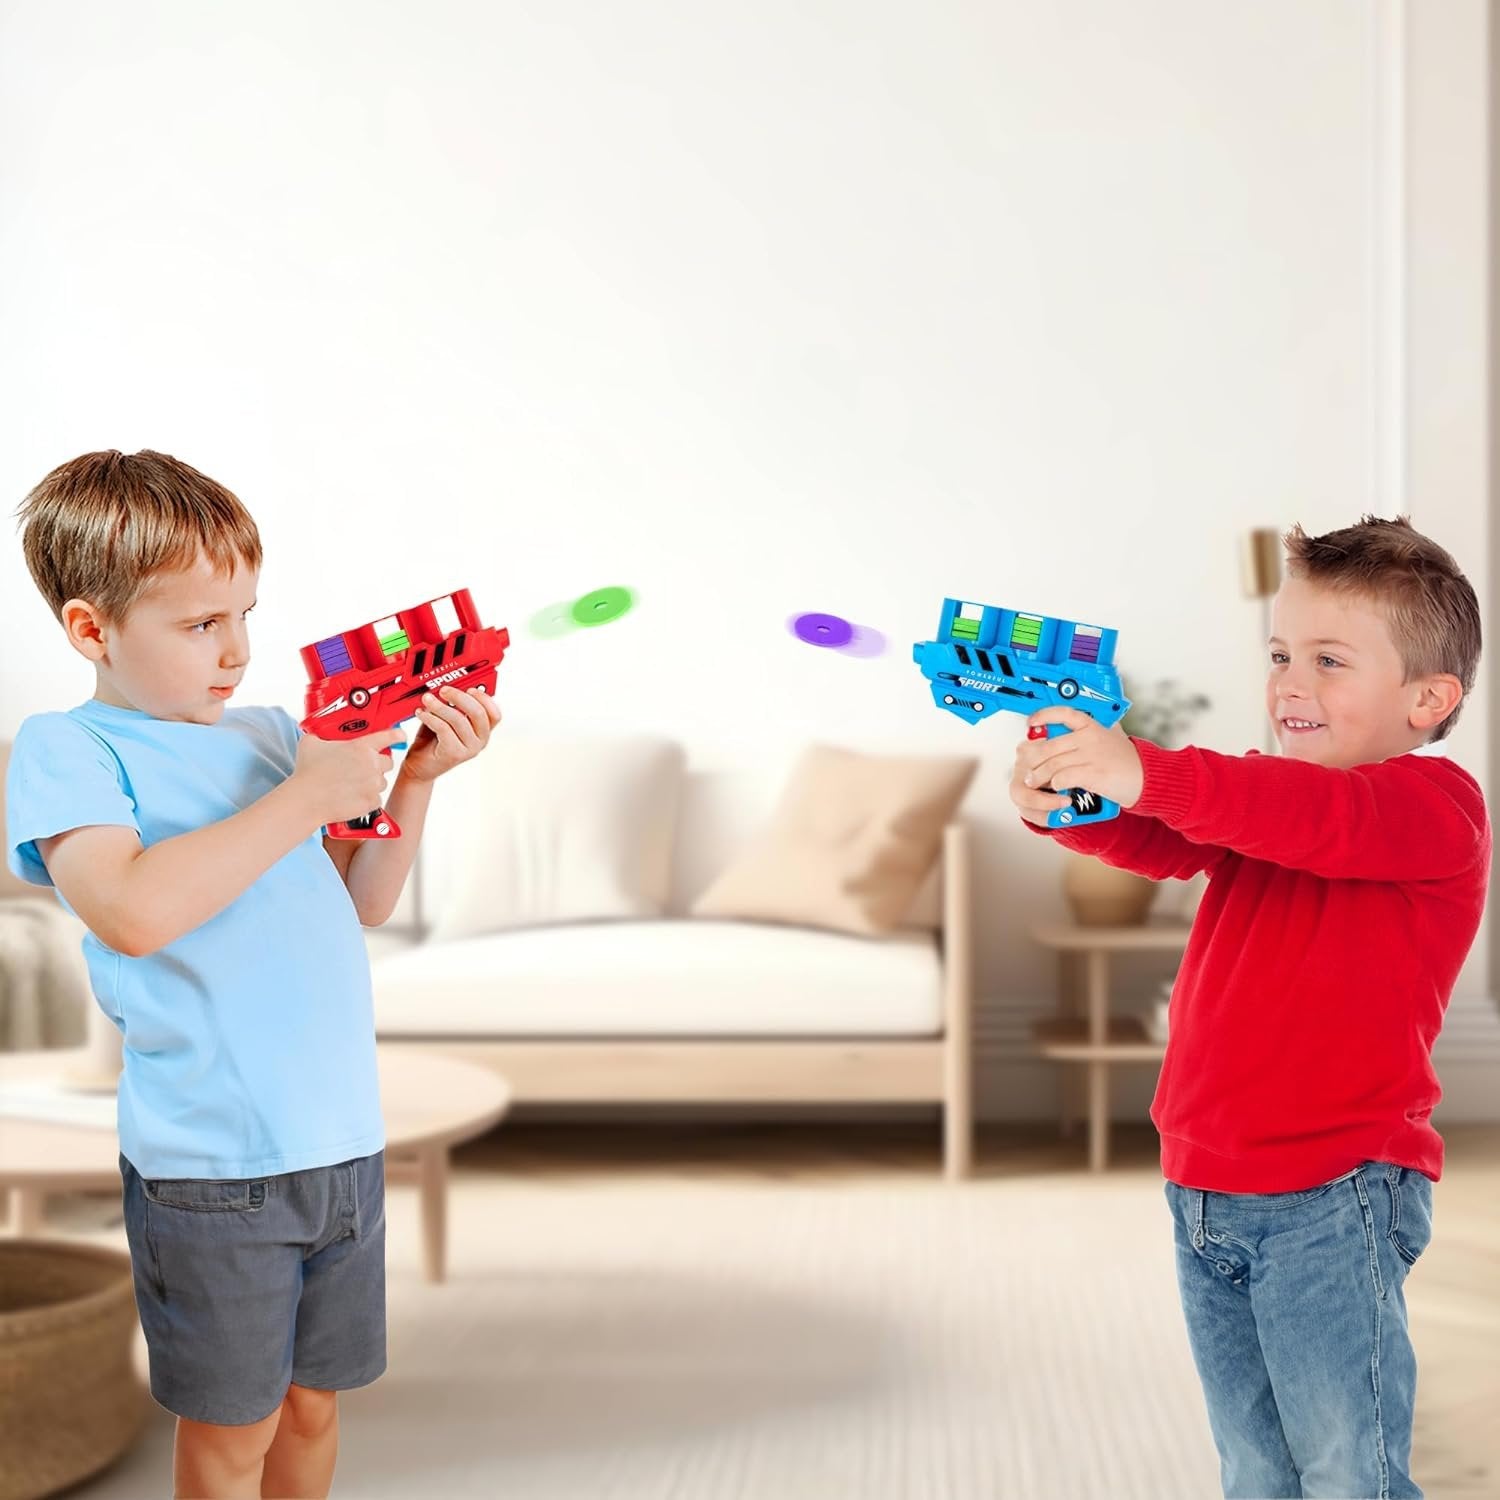 Foam Disc Launcher, Set of 2 Disk Shooter Toy Guns with 2 Guns and 36 Flying Disks, Outdoor Games and Activities for Summer Fun, Party Favors and Outdoor Toys for Kids Ages 8-12